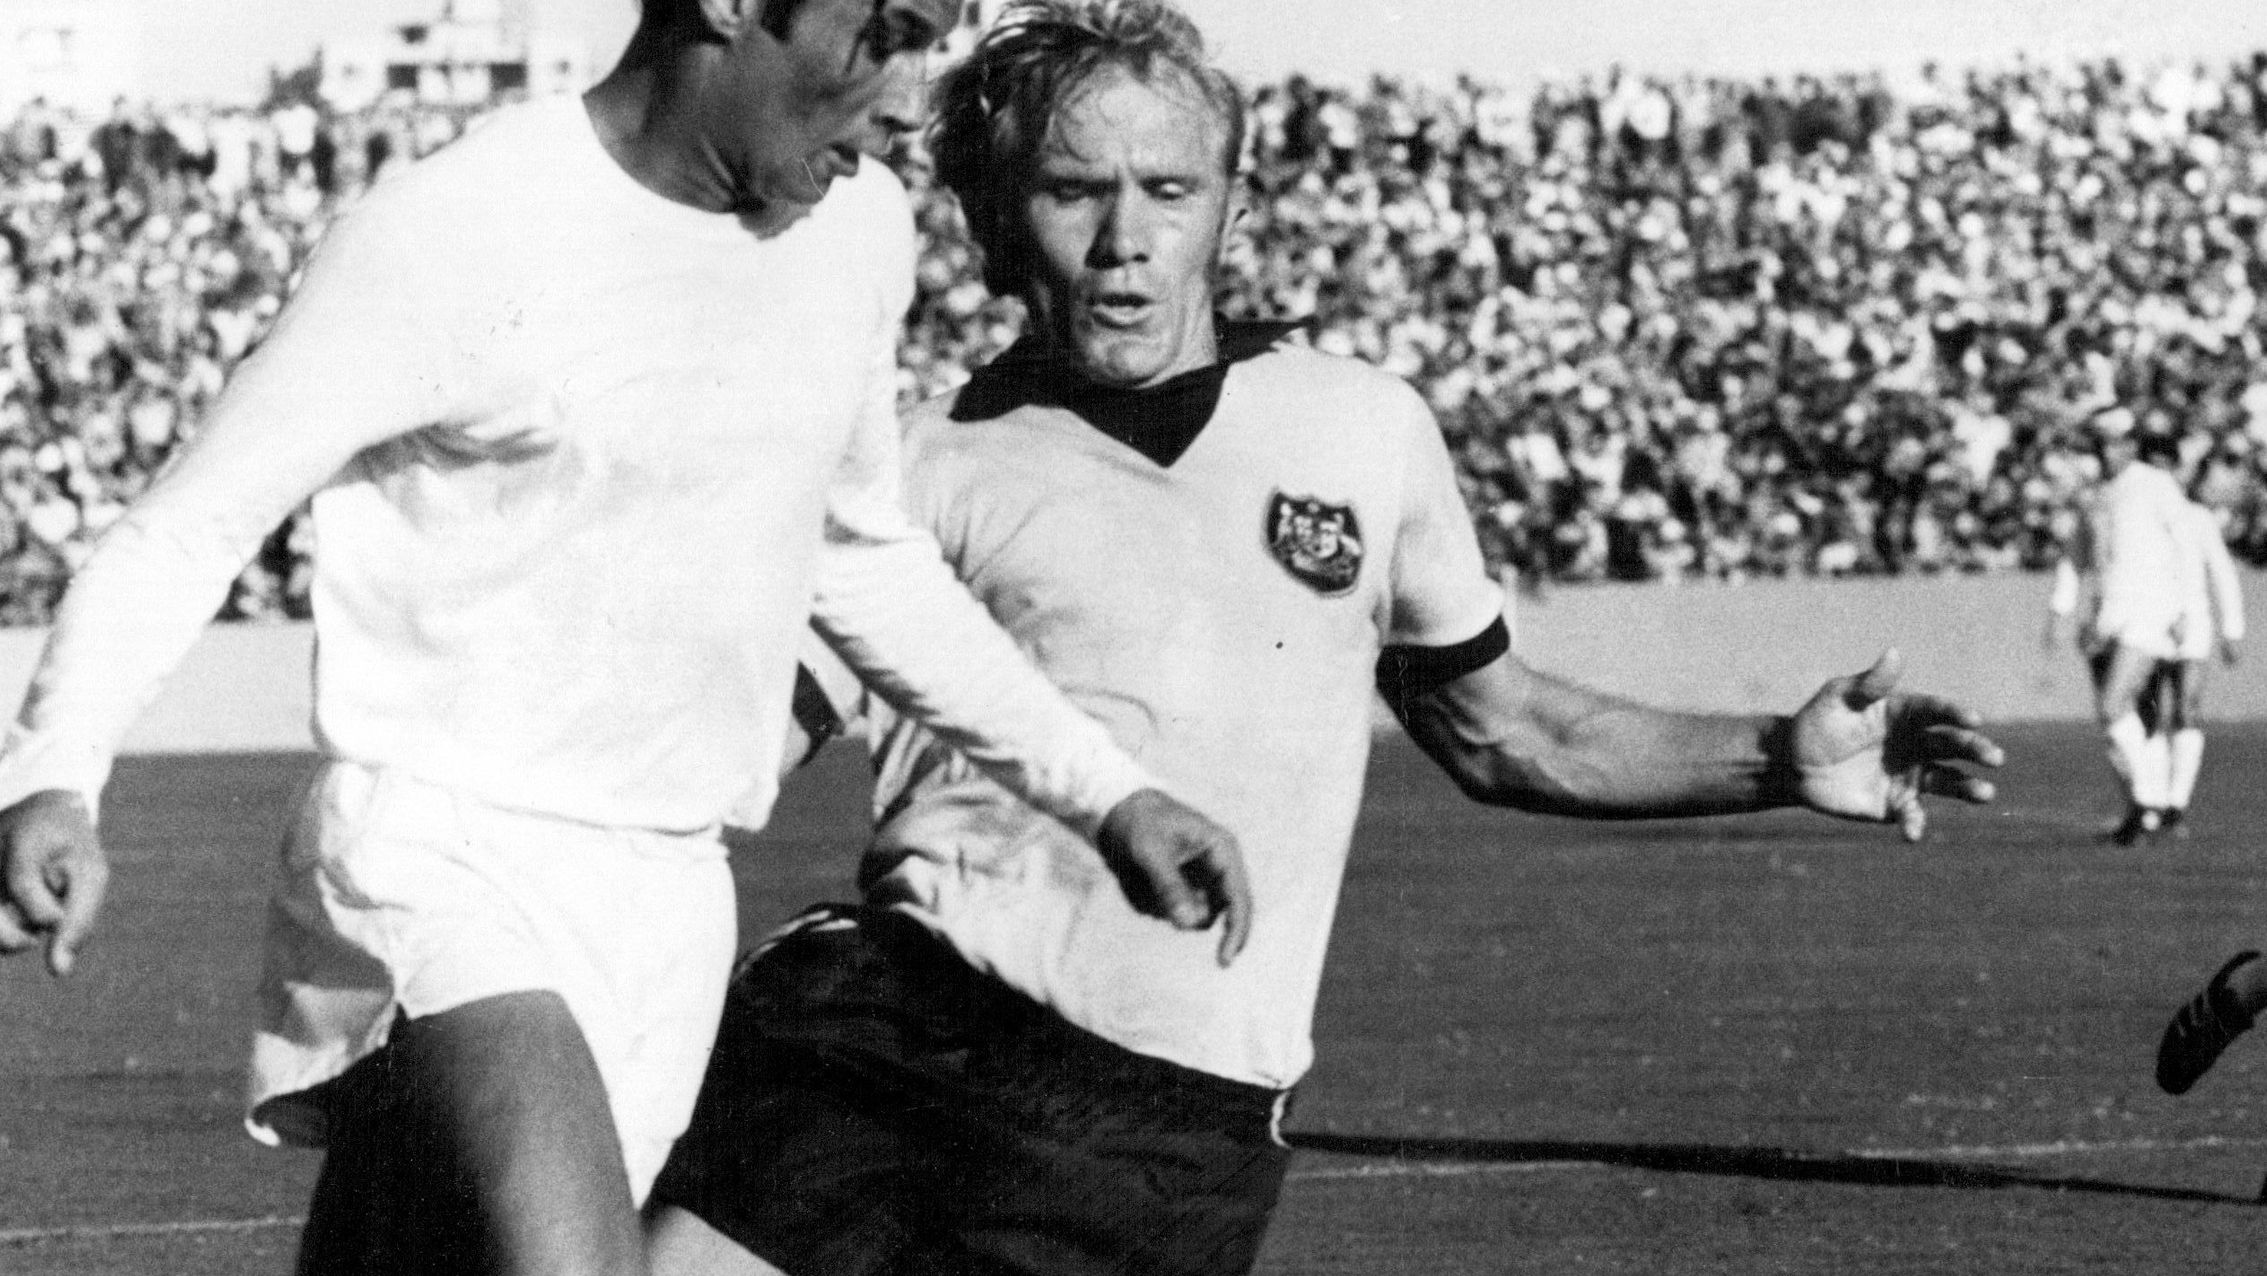 Manfred Schaefer makes a tackle on an Iraq player at the 1973 World Cup.